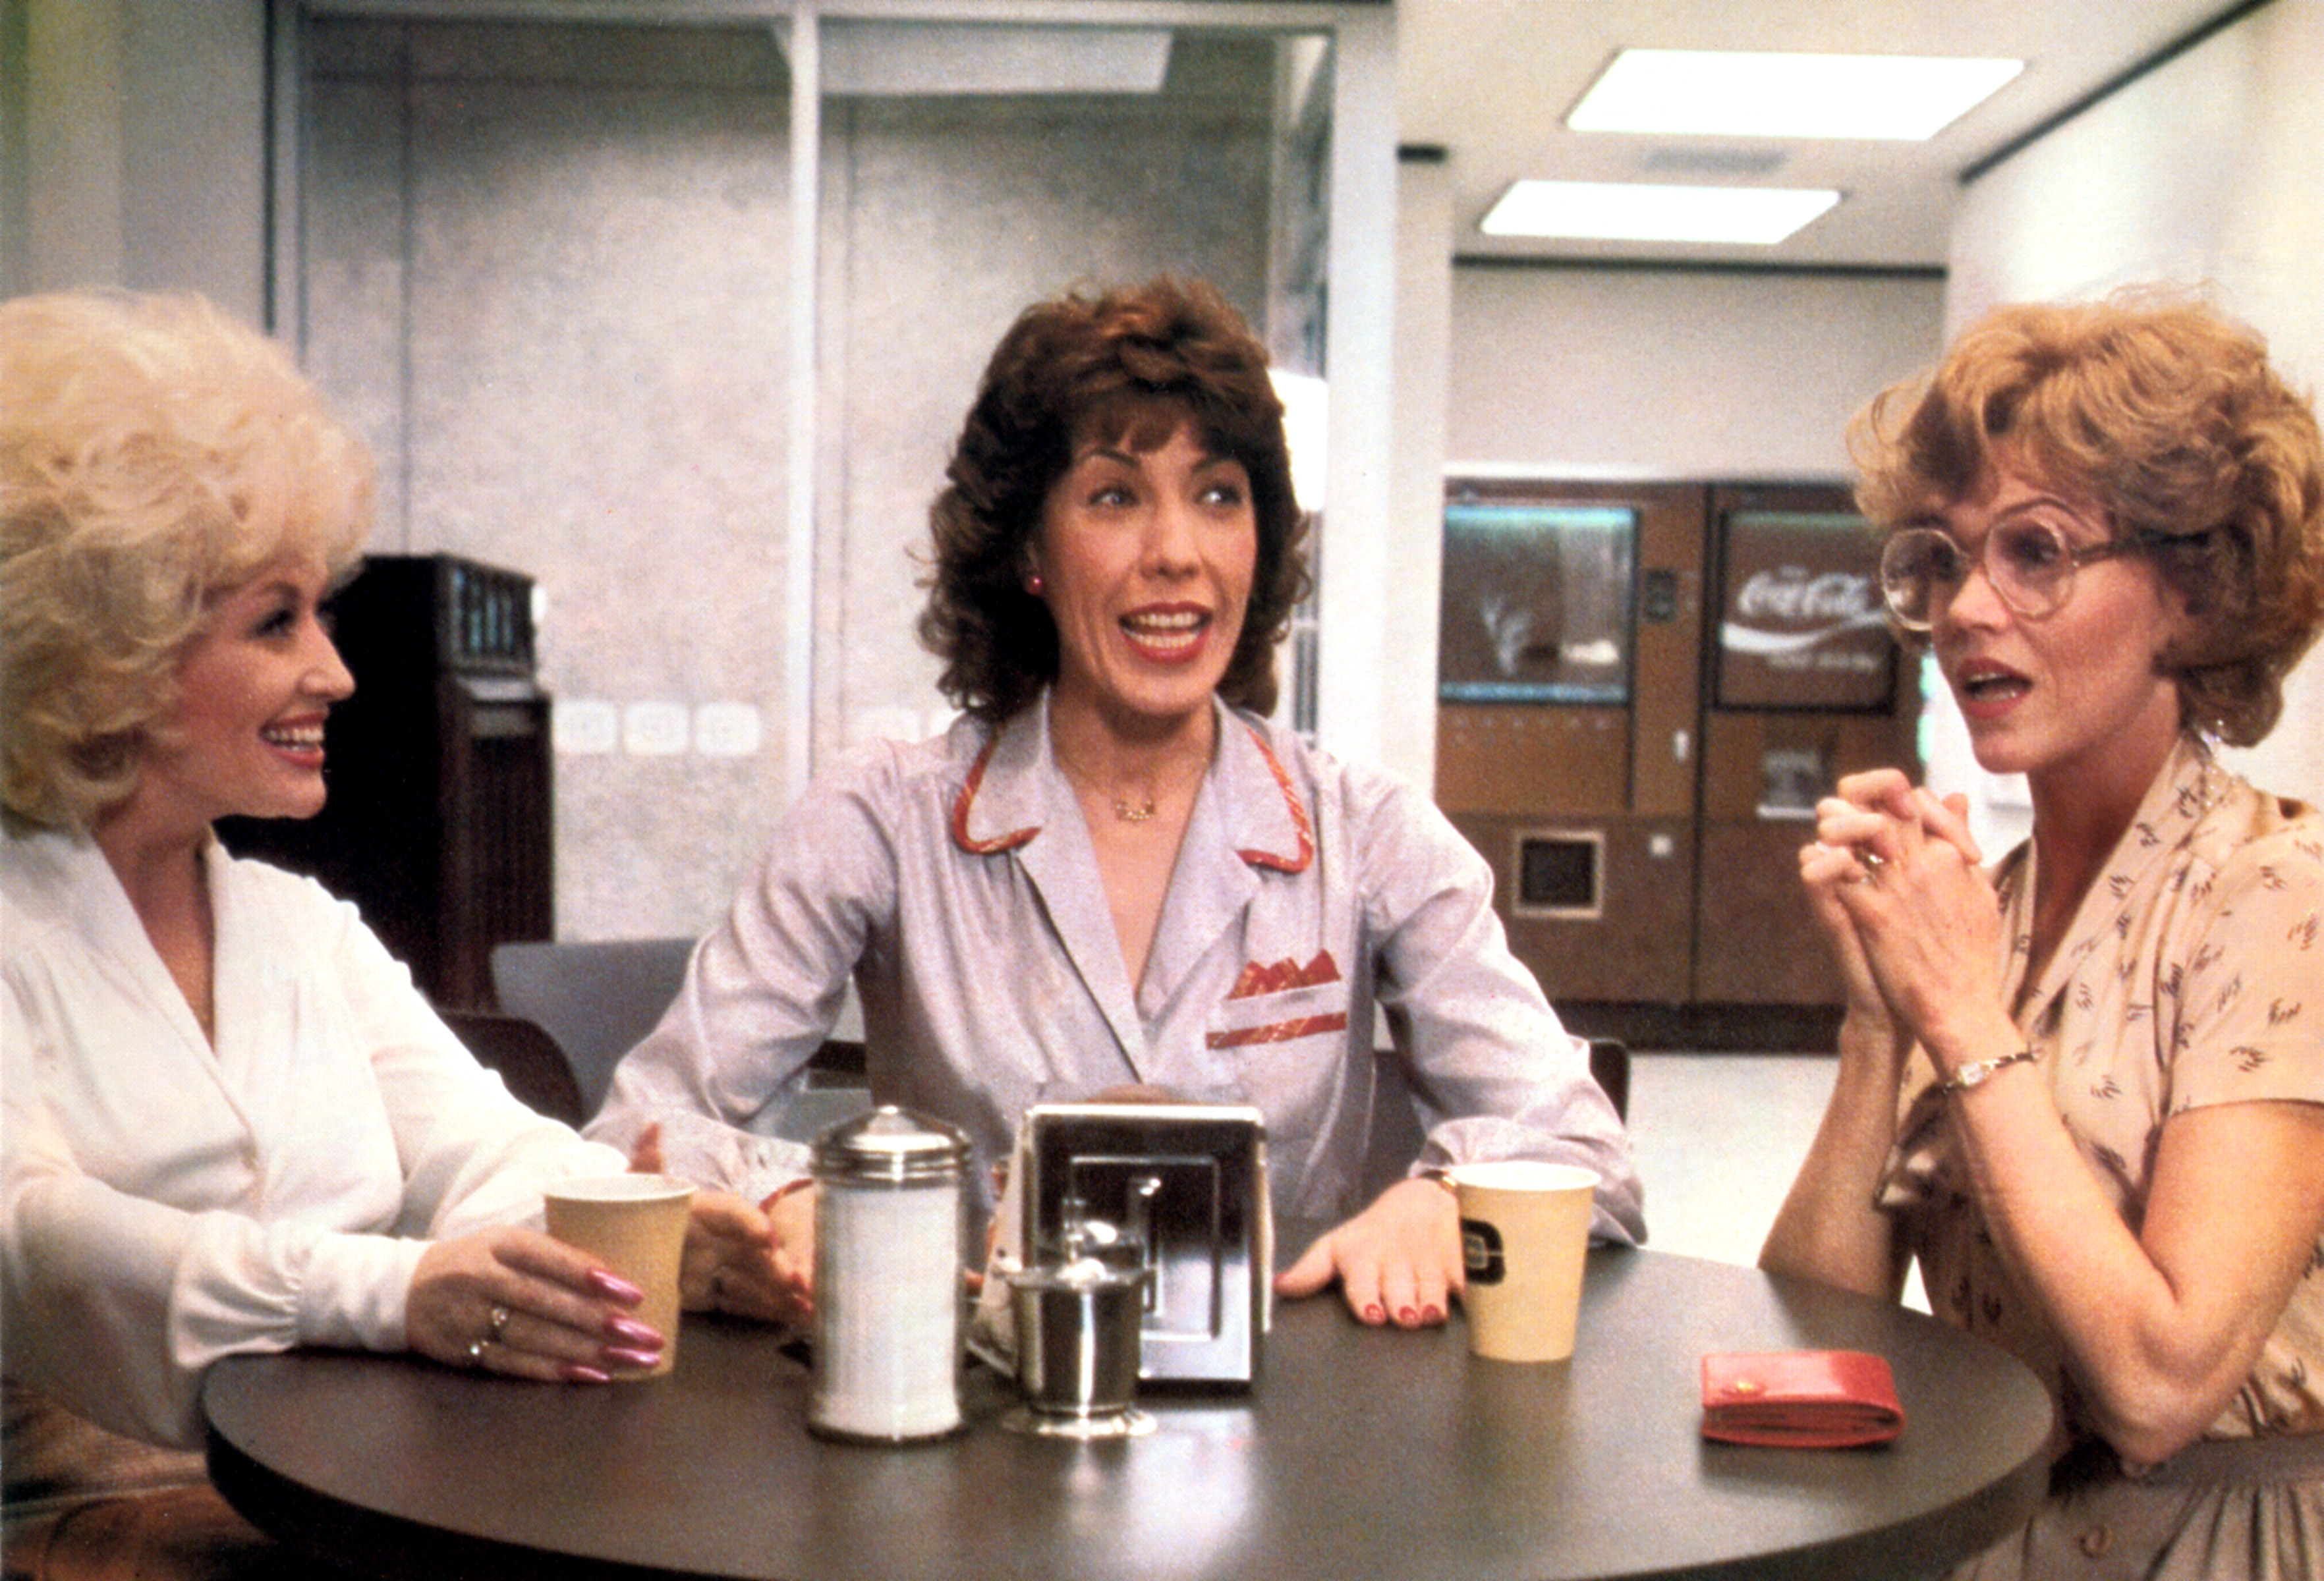 Three characters from the film &quot;9 to 5&quot; sitting at a table engaged in animated conversation